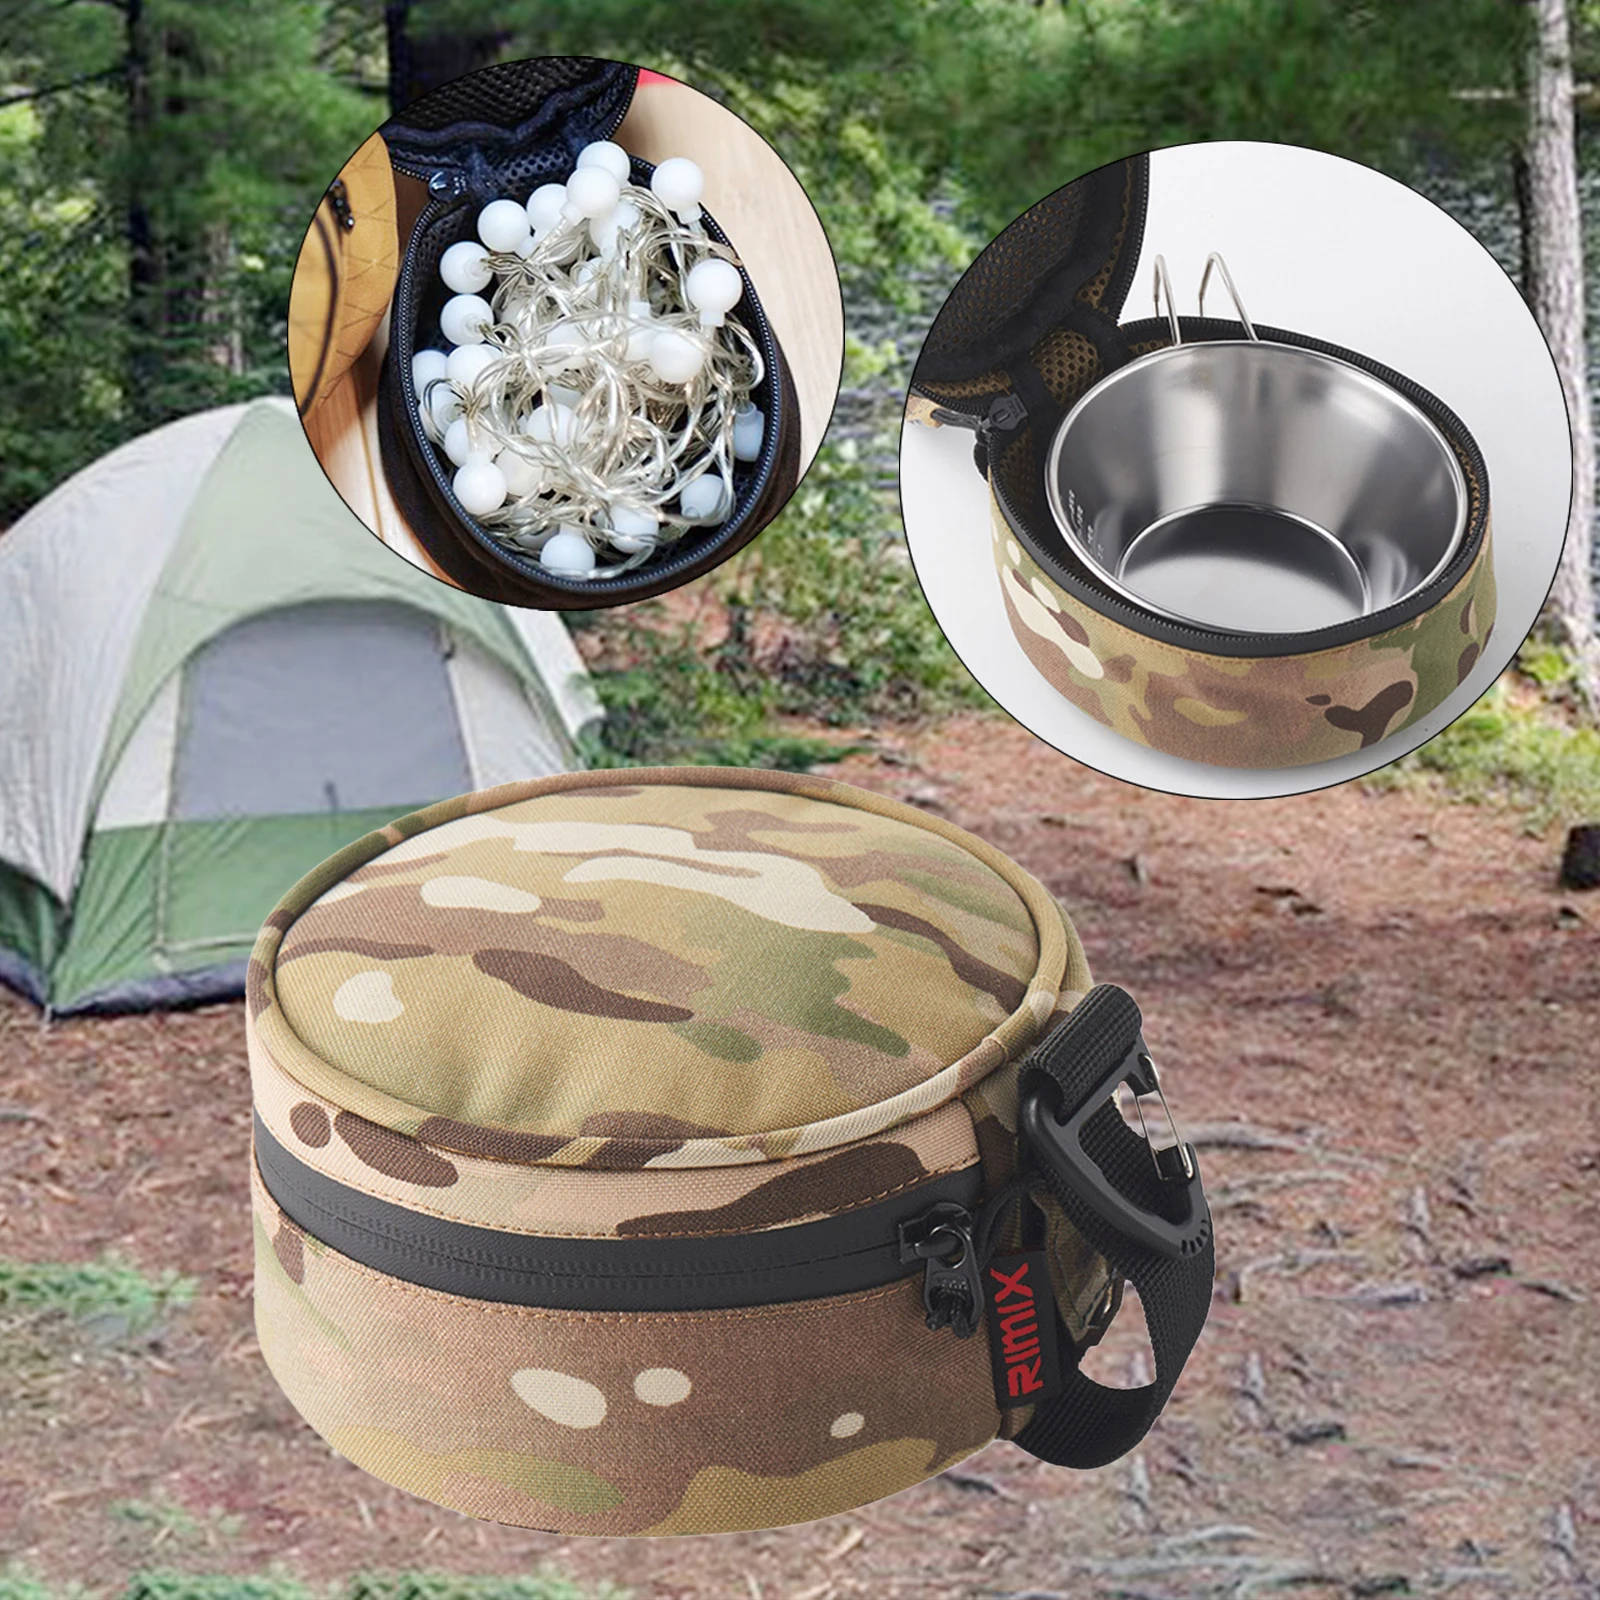 Sierra Cup Storage Bag Barbecue w/Hooks Hand-Held Carrying Bag for Camping